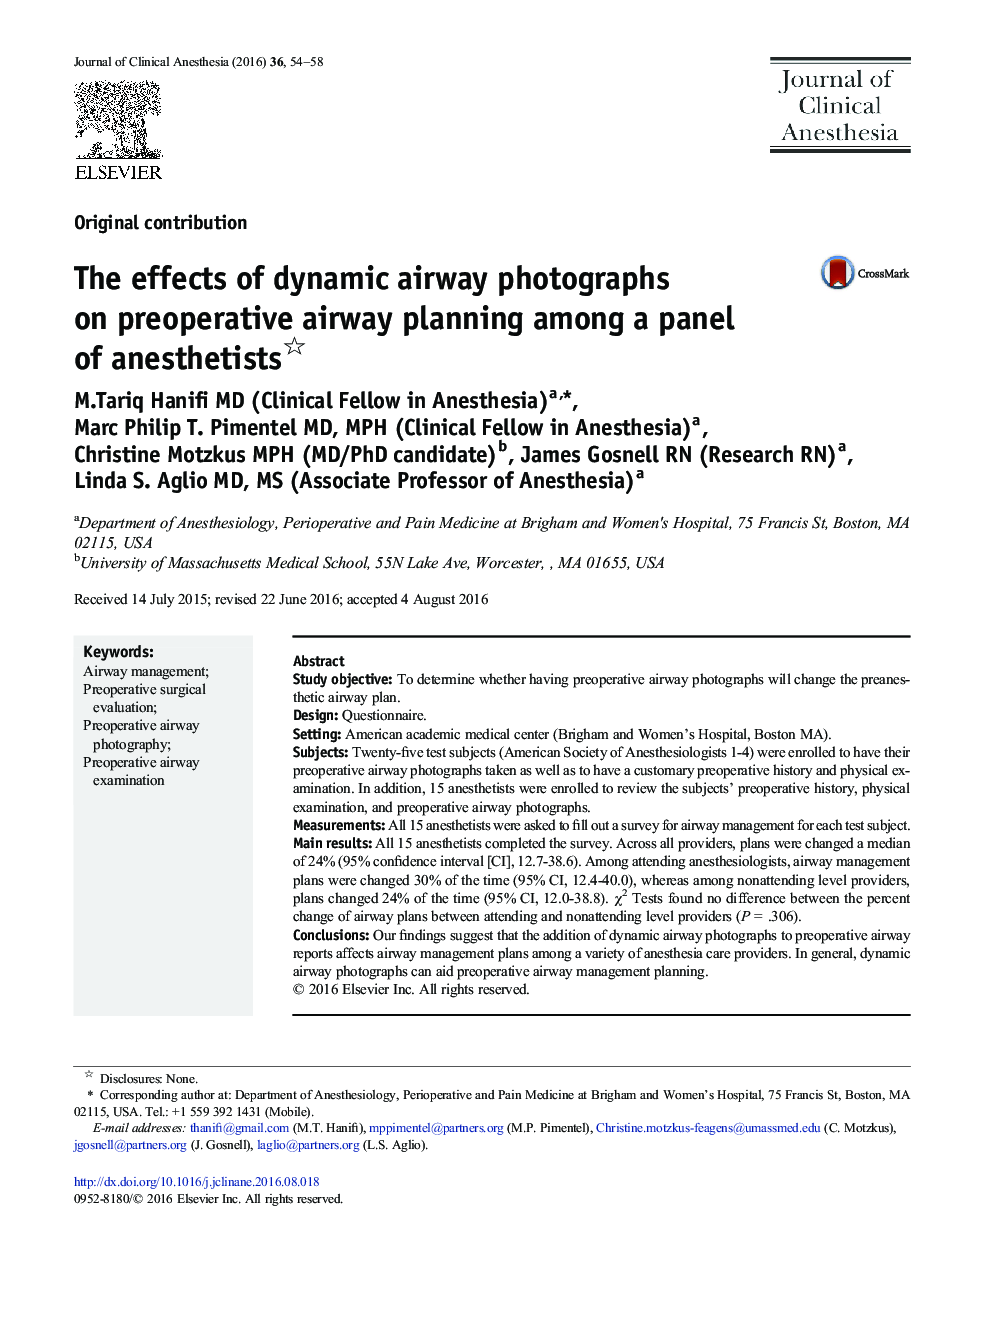 The effects of dynamic airway photographs on preoperative airway planning among a panel of anesthetists